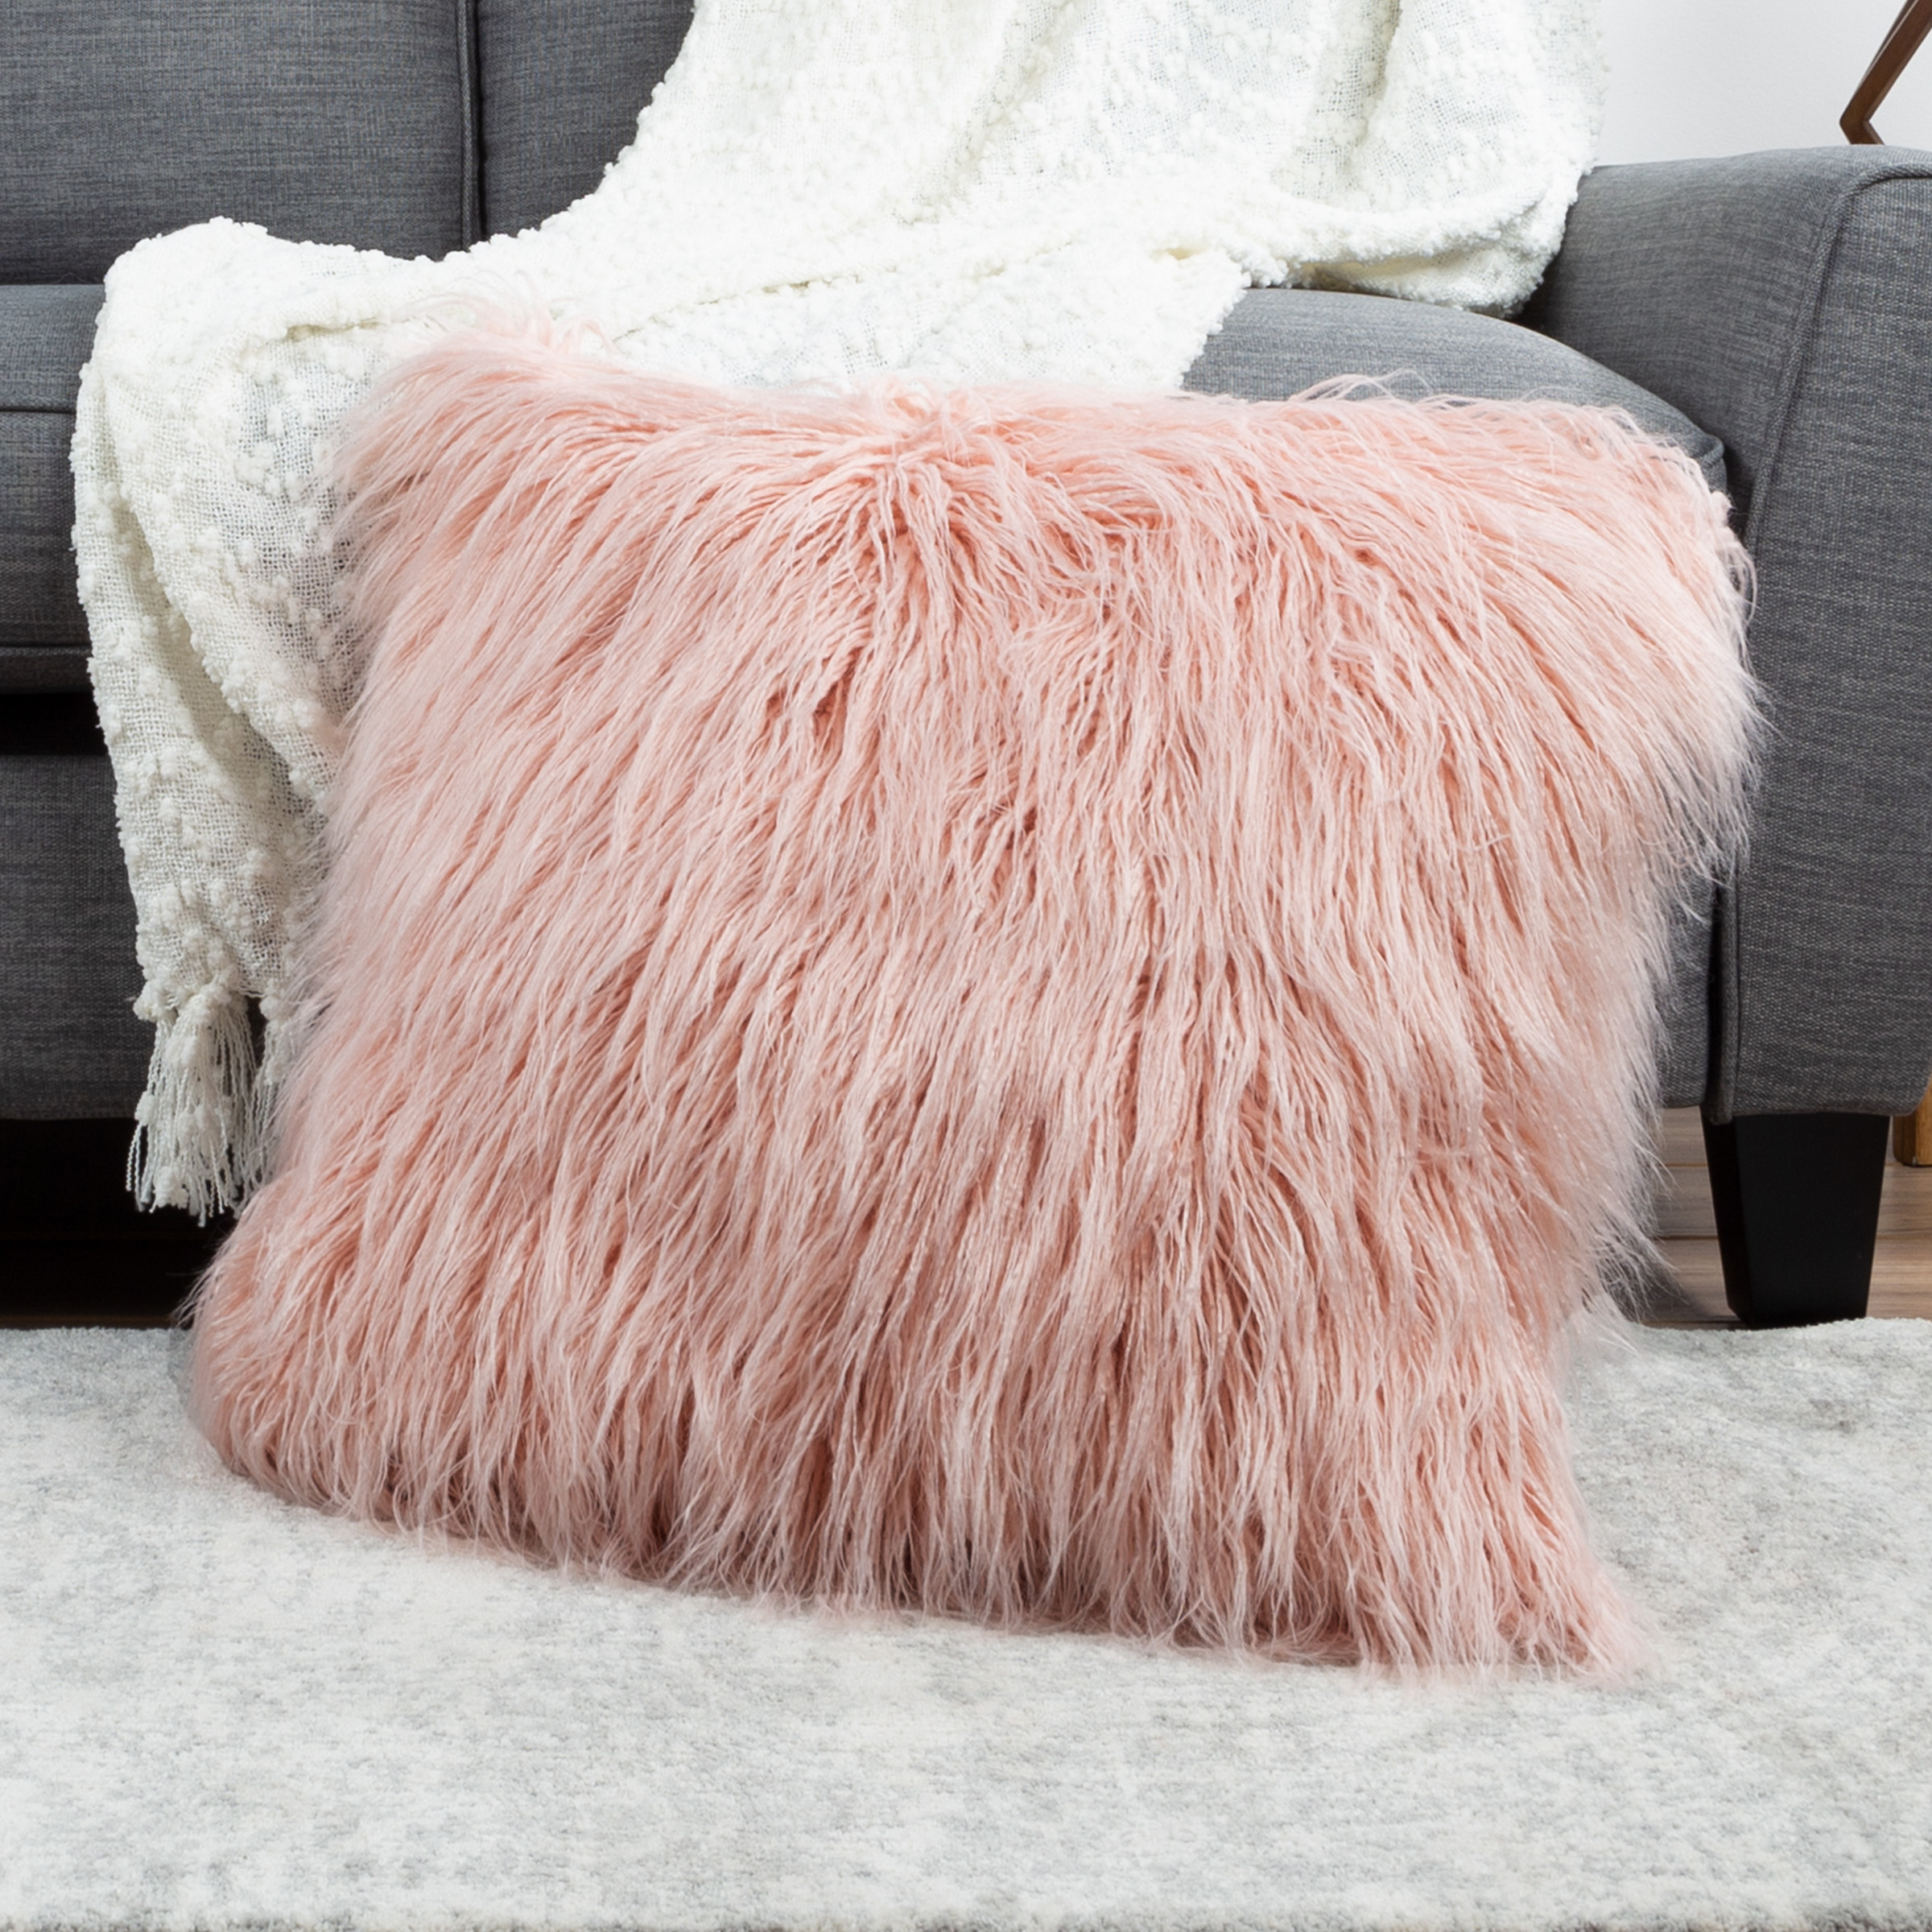 22 In Mongolian Faux Fur Throw Accent Pillow 7 In Thick Square Shag Style XL - Pink